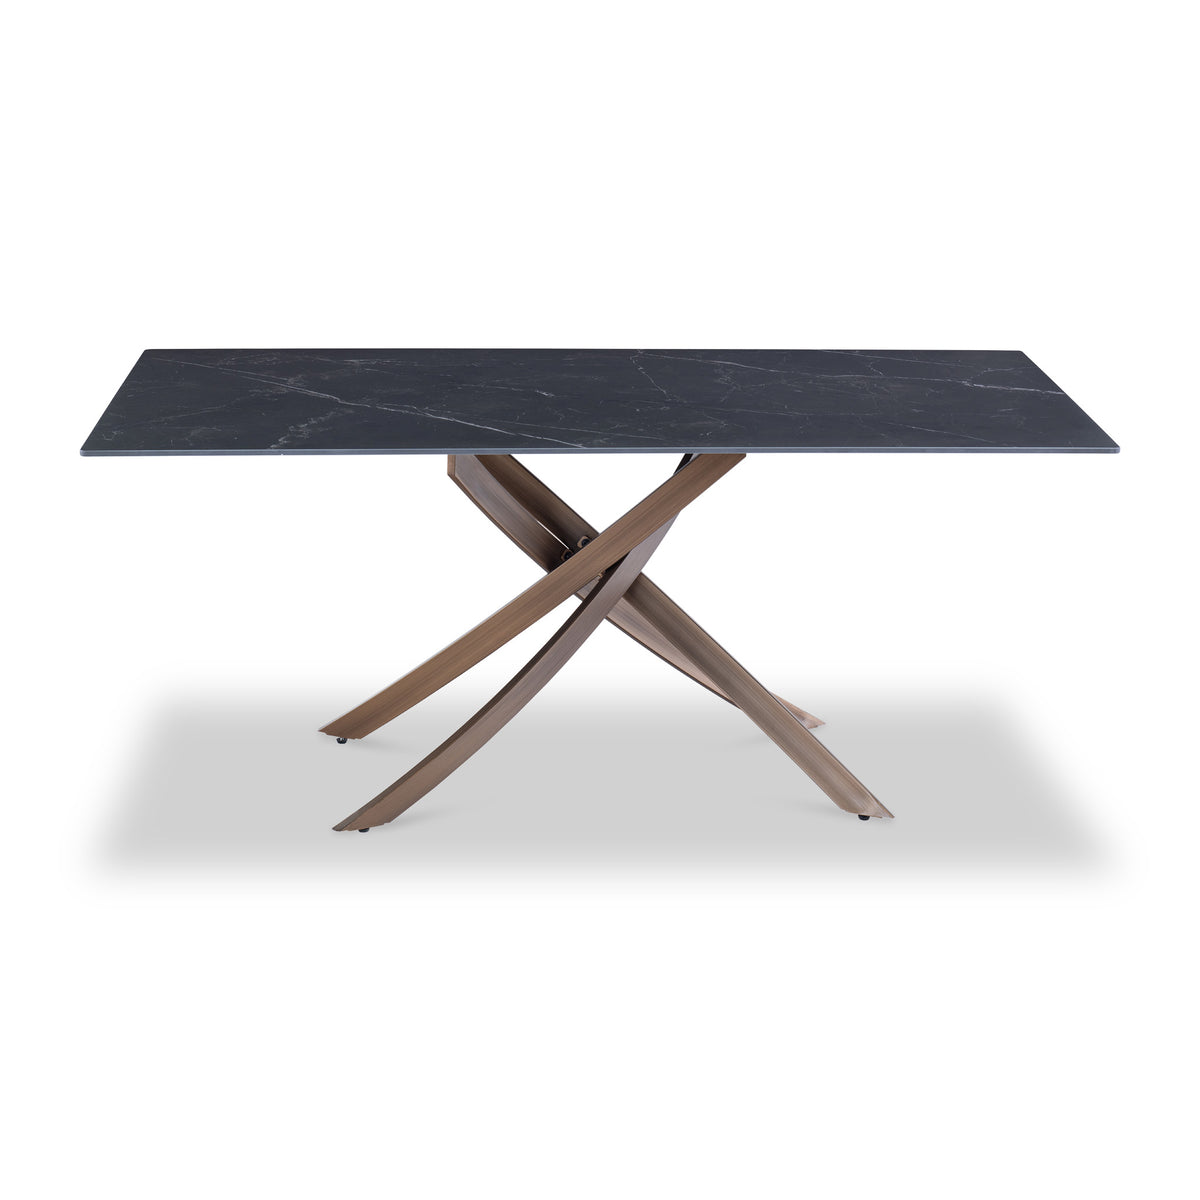 Gwen Black 180cm Sintered Stone Dining Table from Roseland Furniture